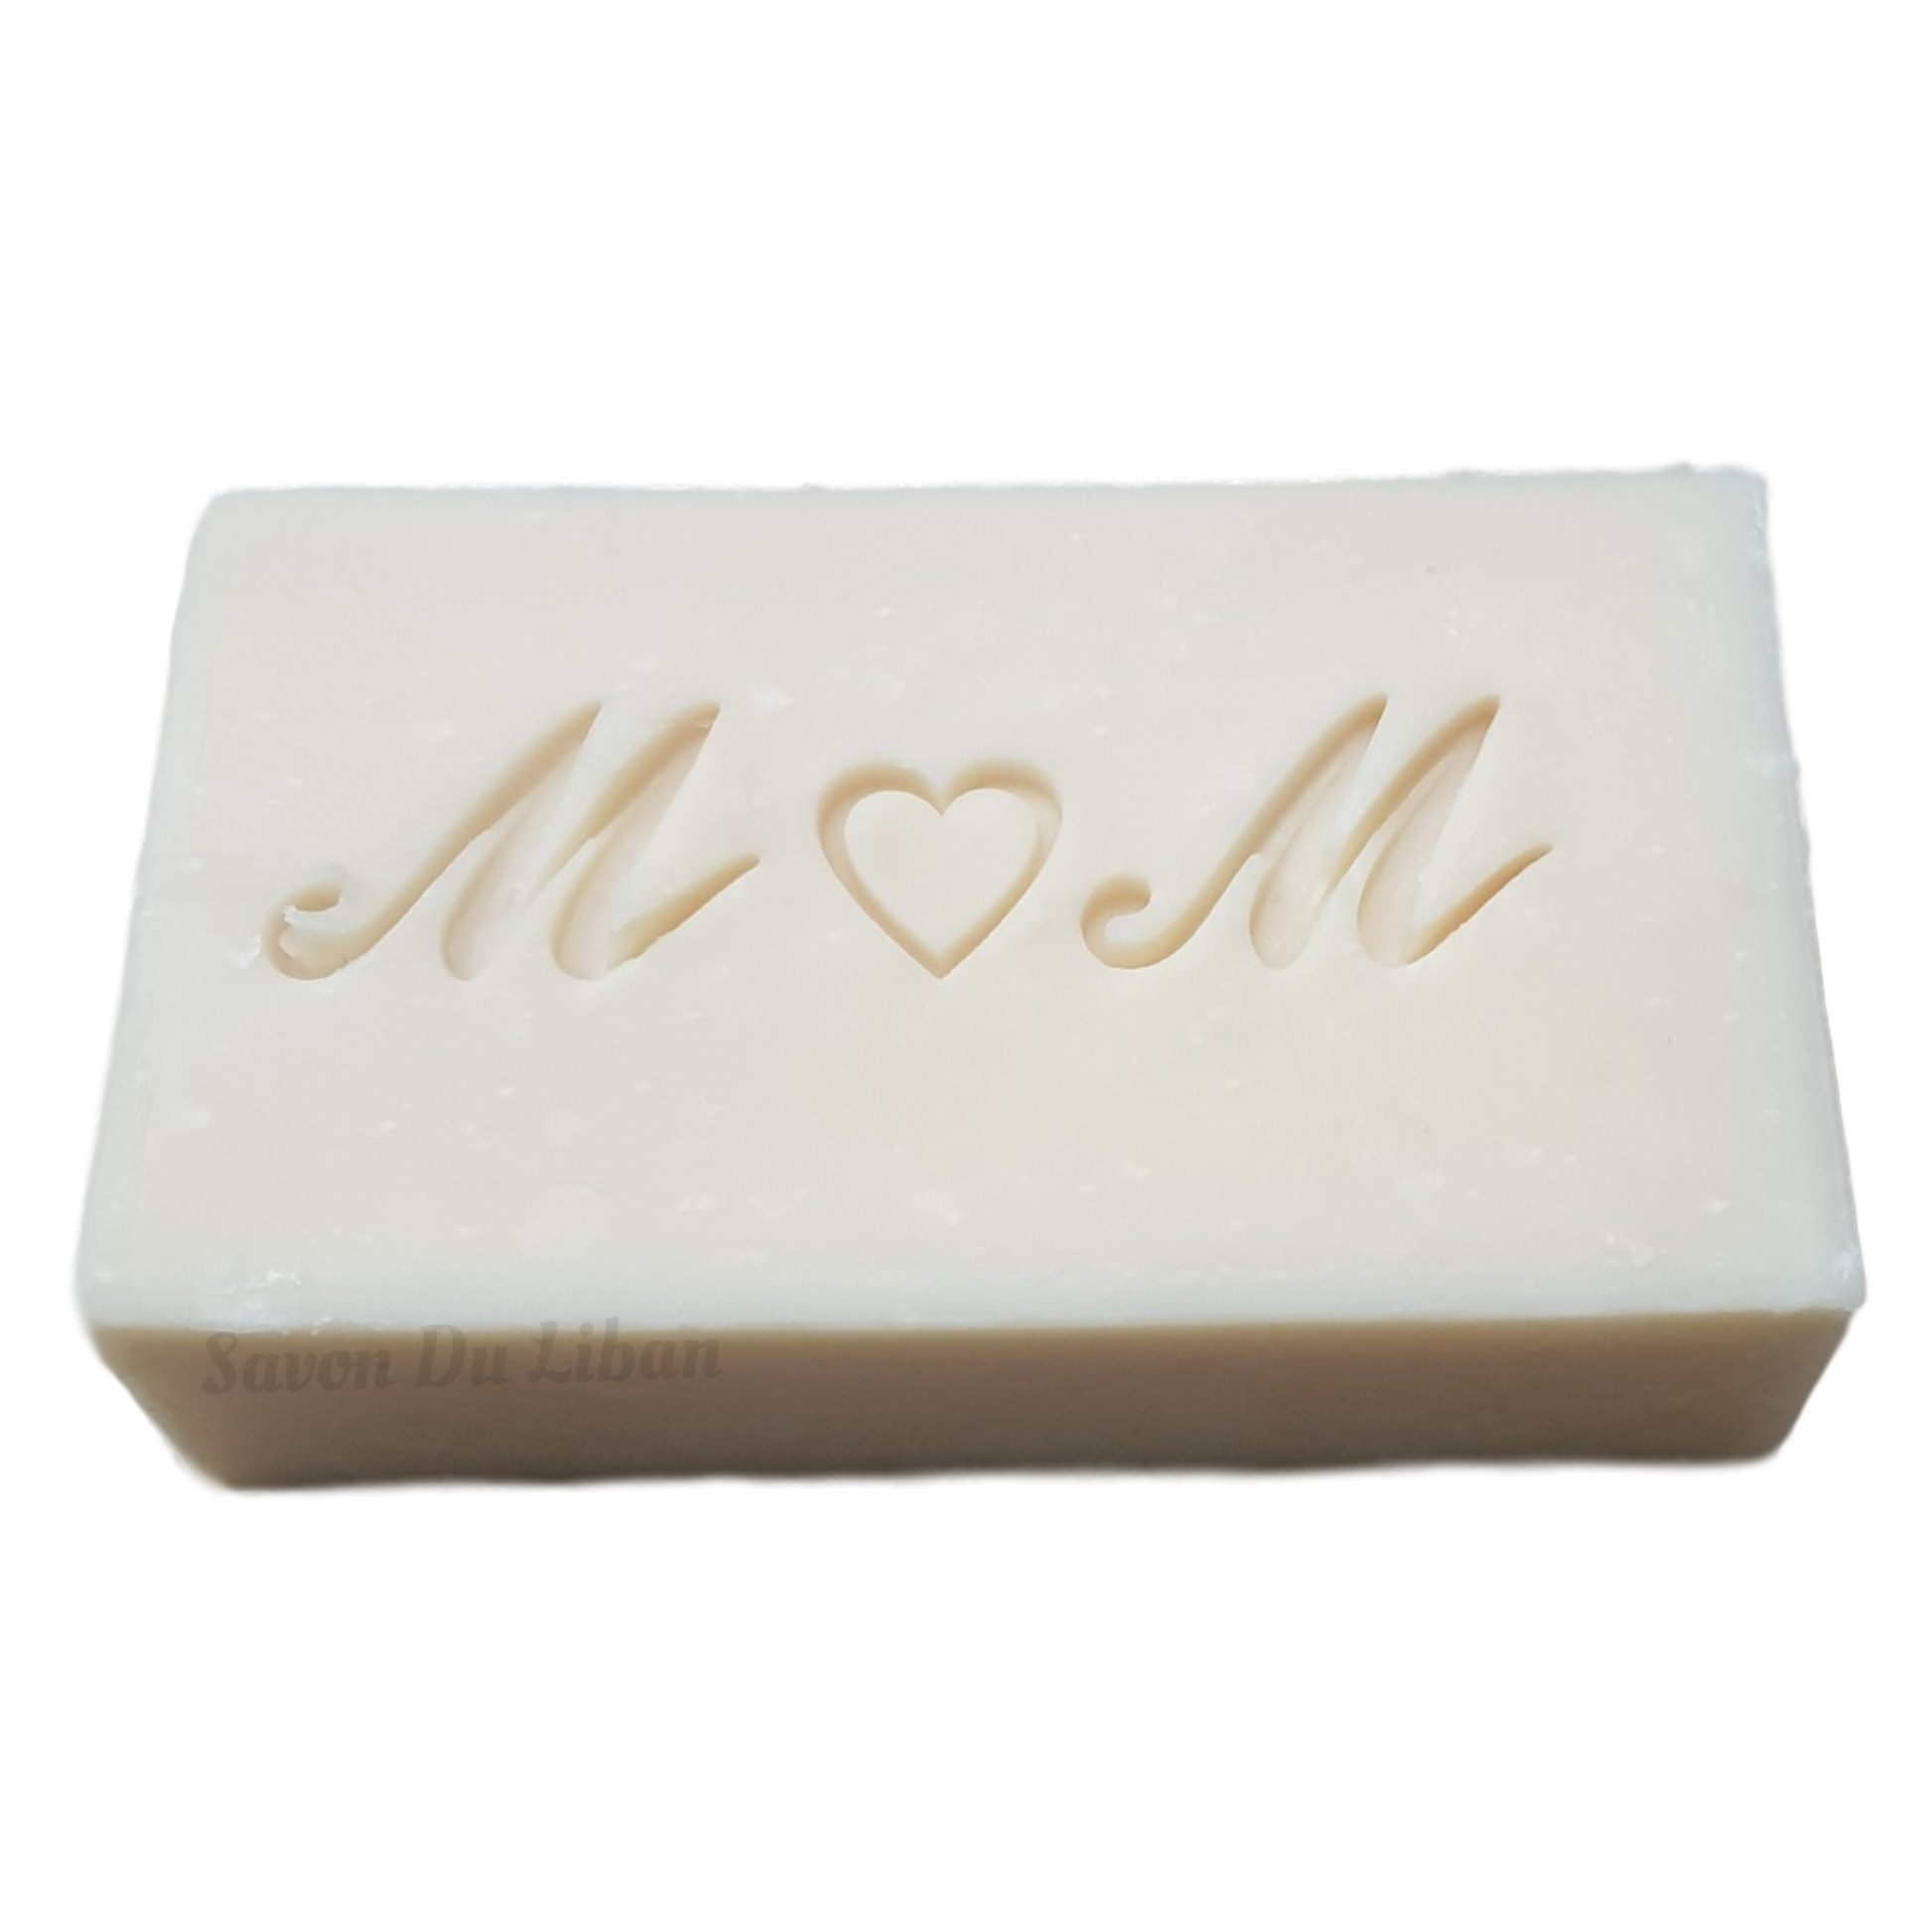 Natural Soap Bars from Lebanon - Stamped By Hand - Mother's Day MoM